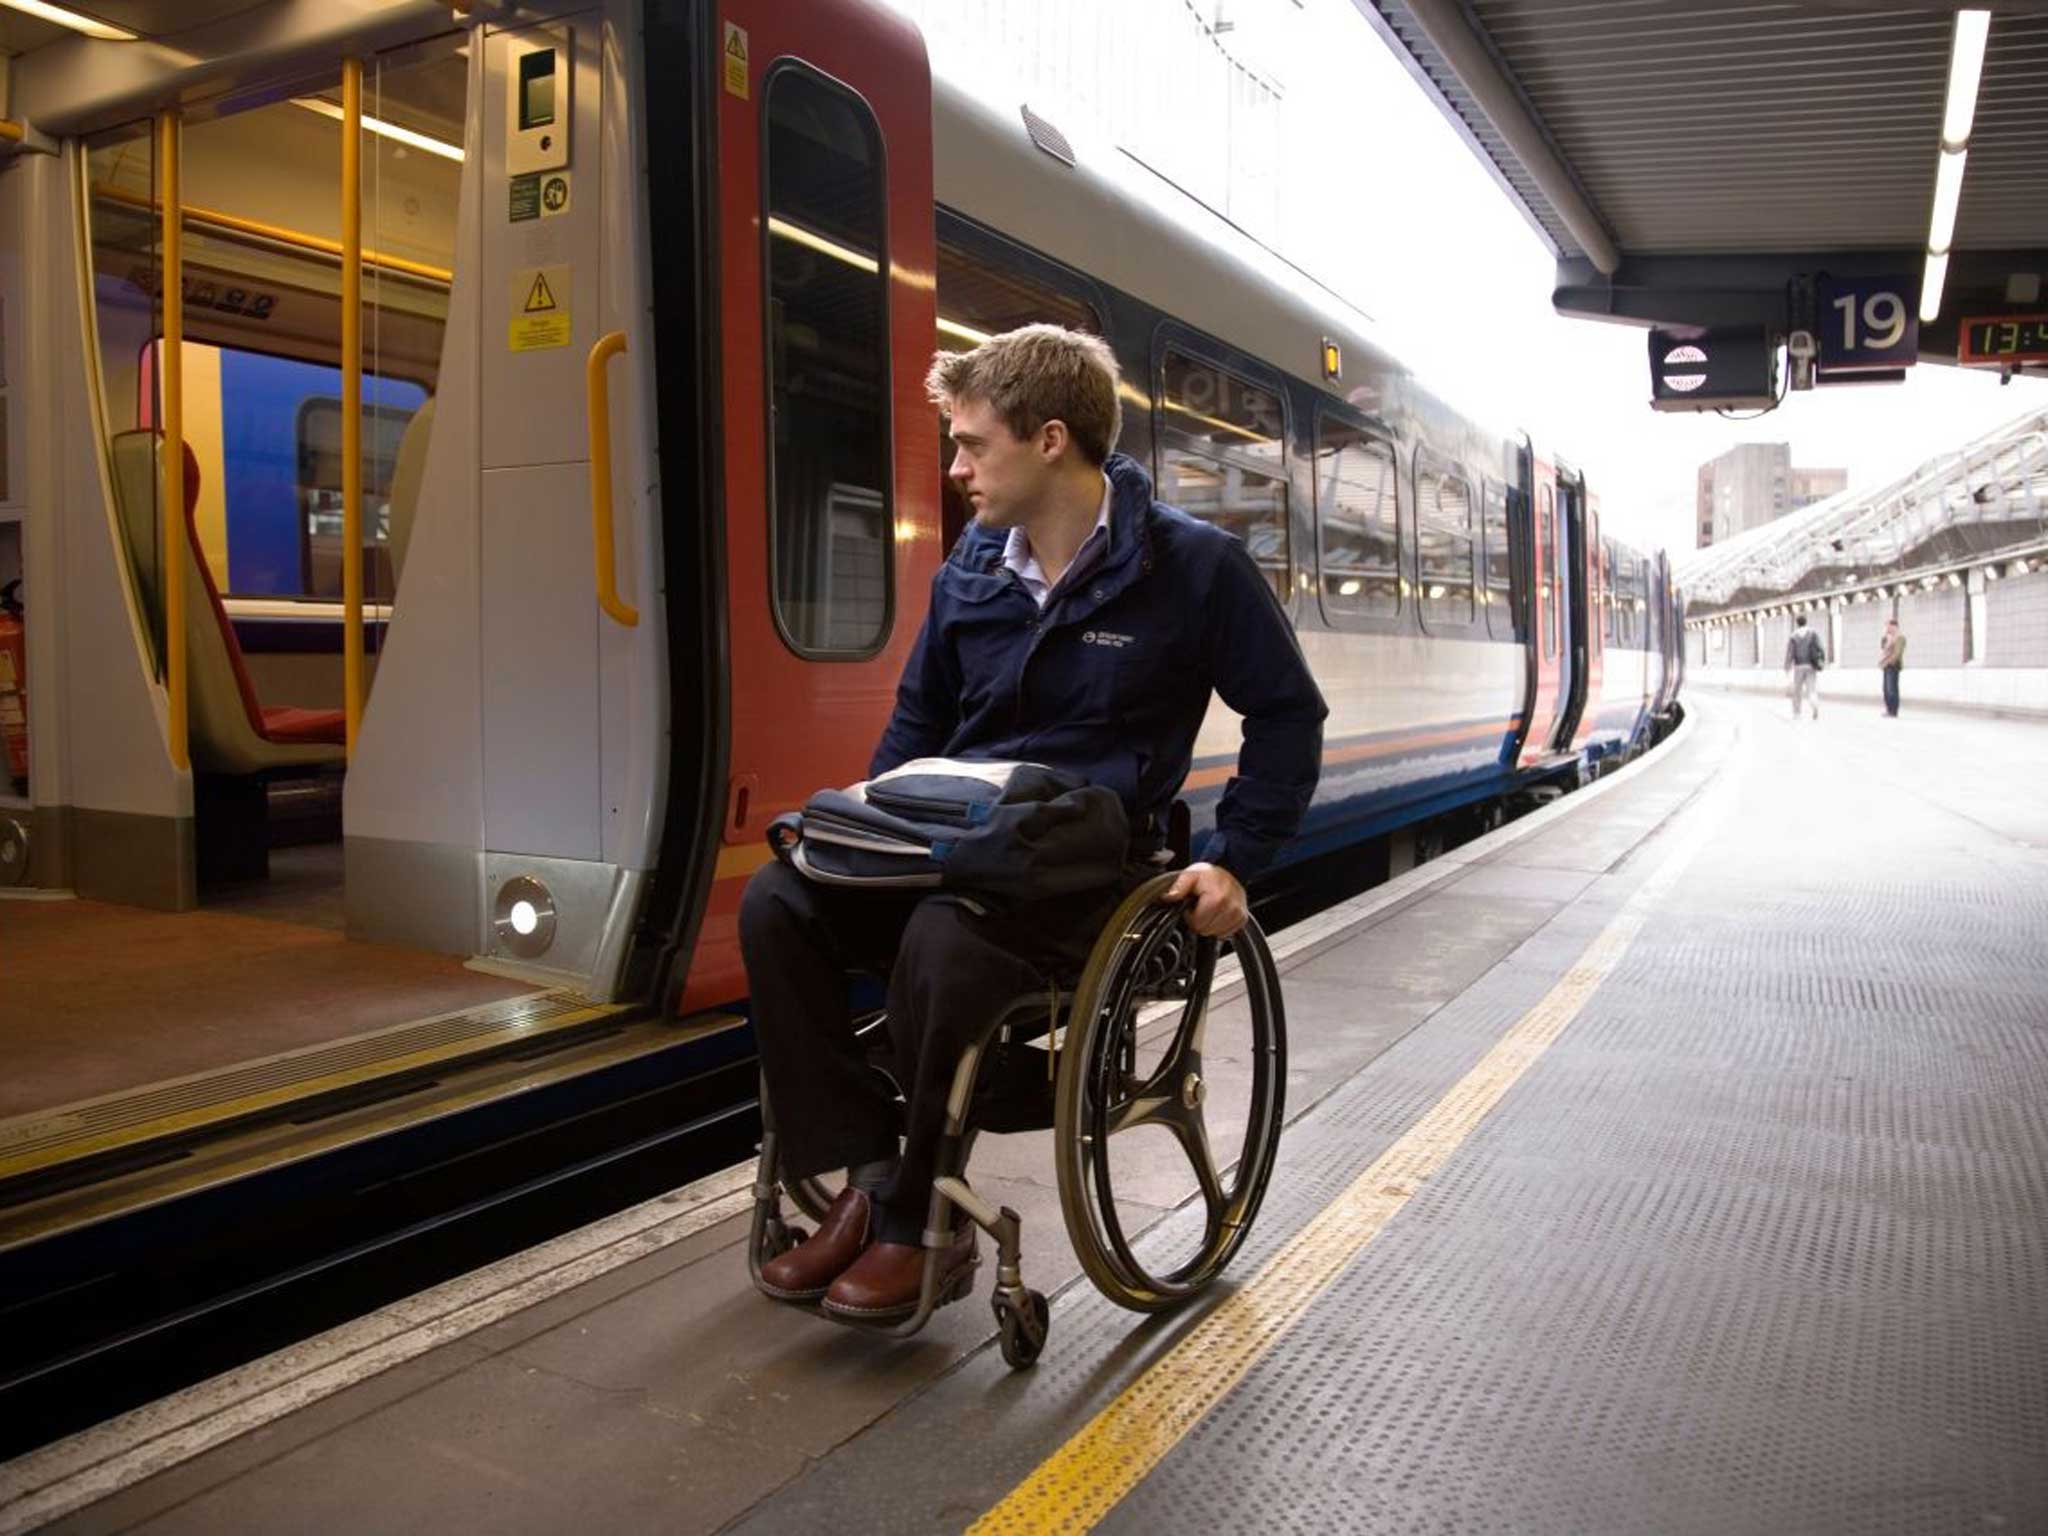 The Department for Transport has cut funding for the Access for All programme